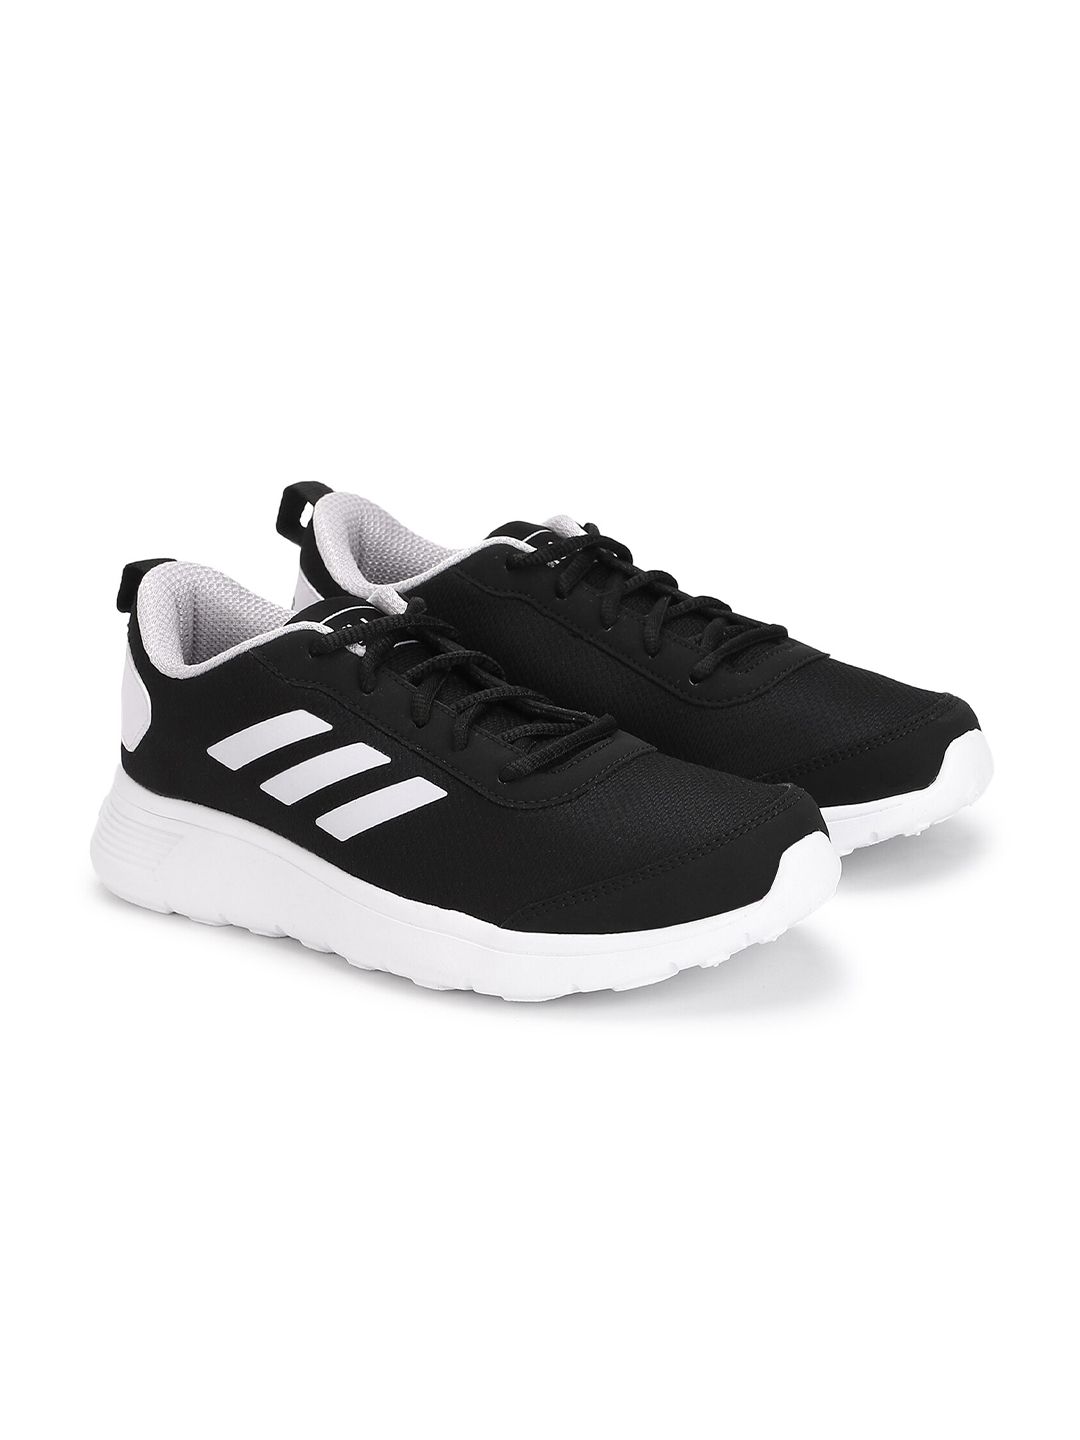 ADIDAS Women Black Textile Running Clear Factor Non-Marking Shoes Price in India